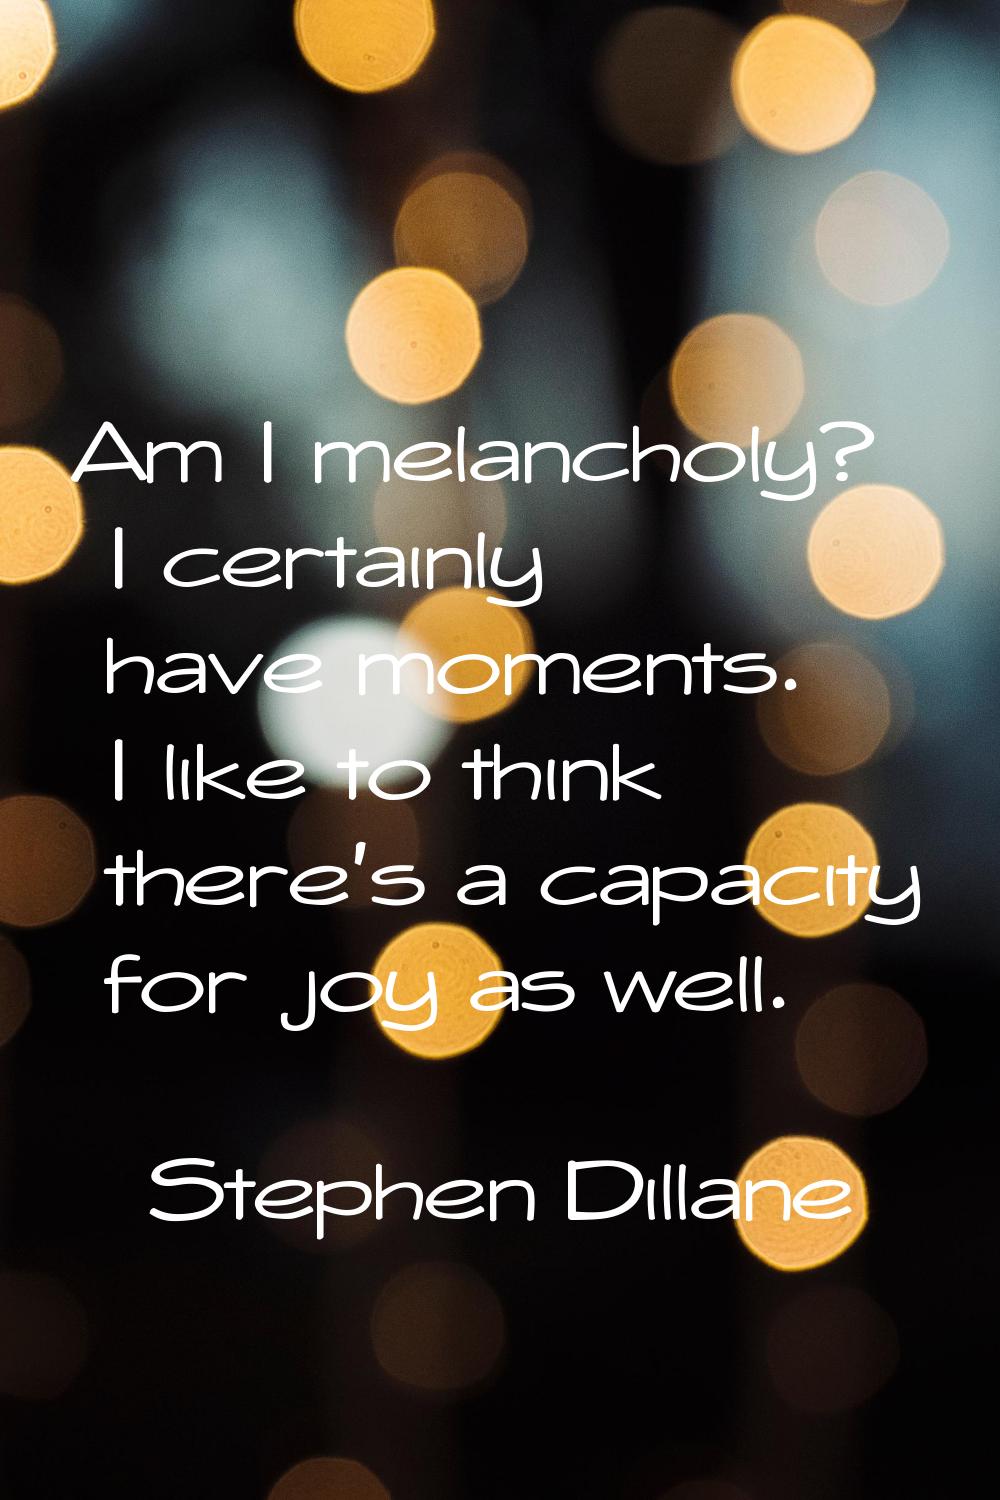 Am I melancholy? I certainly have moments. I like to think there's a capacity for joy as well.